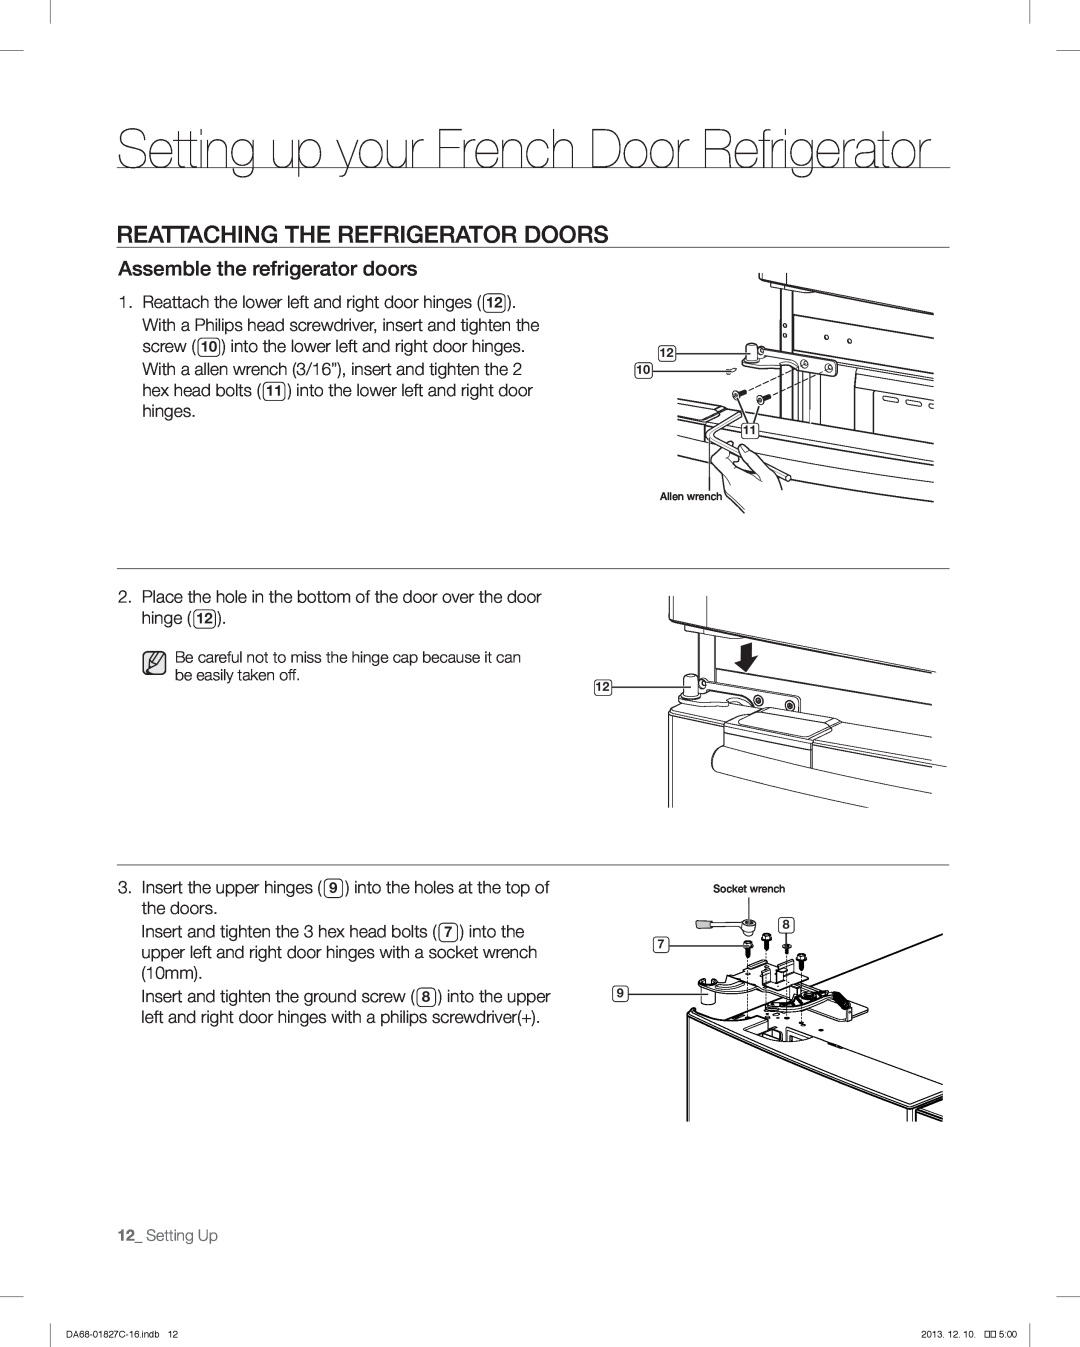 Samsung RFG237AARS user manual Reattaching The Refrigerator Doors, Setting up your French Door Refrigerator 